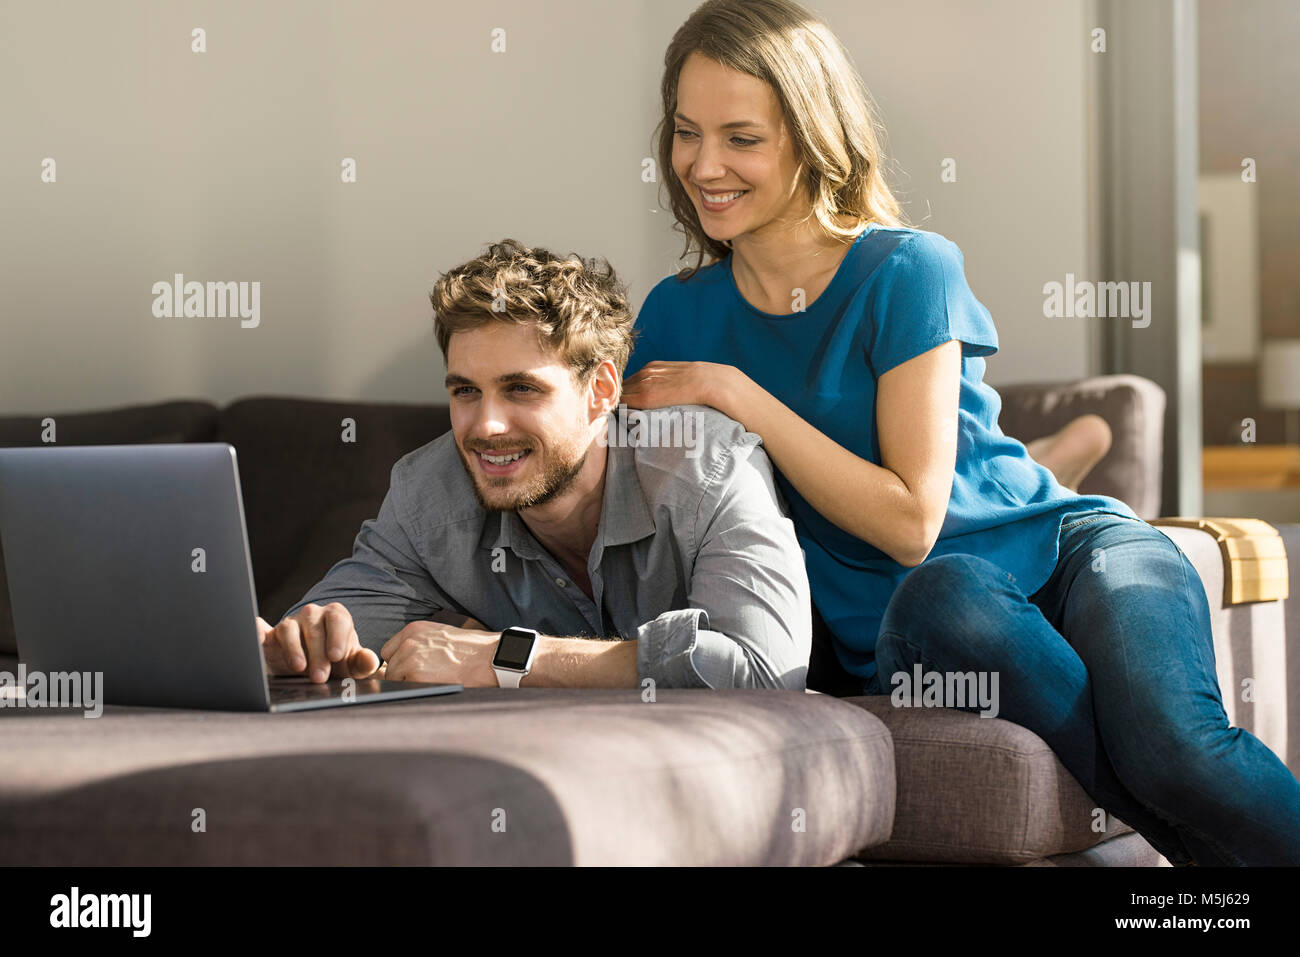 Smiling couple using laptop on sofa at home Banque D'Images